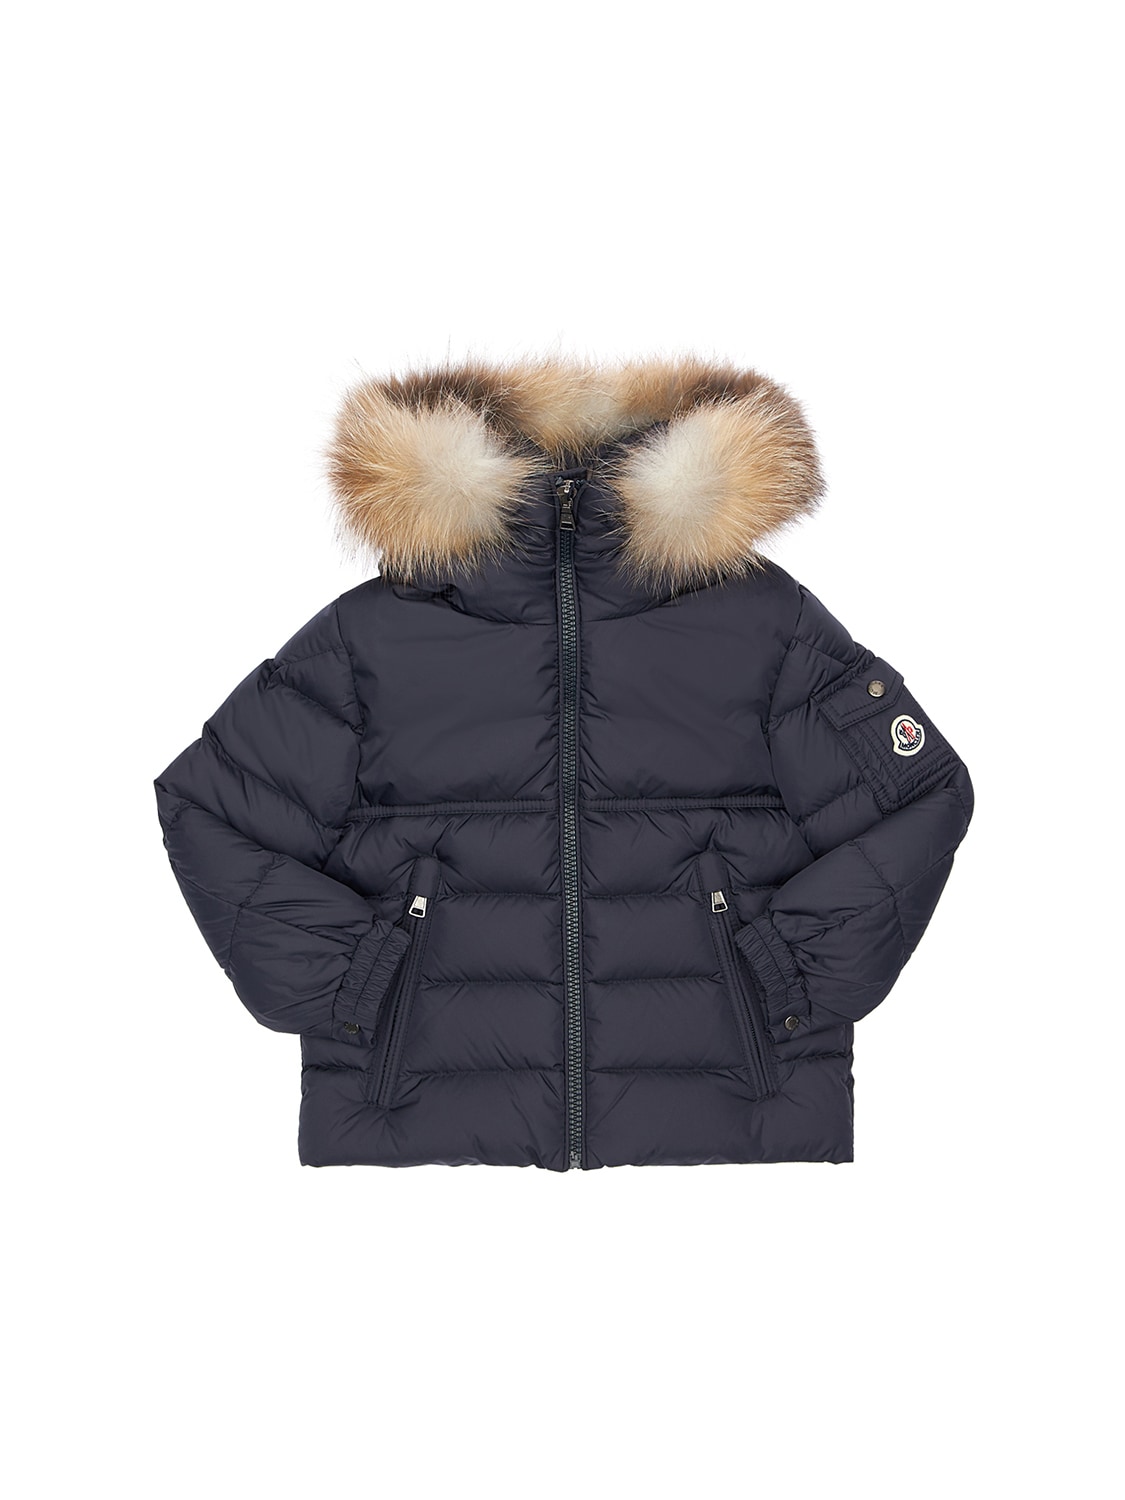 are moncler jackets real fur